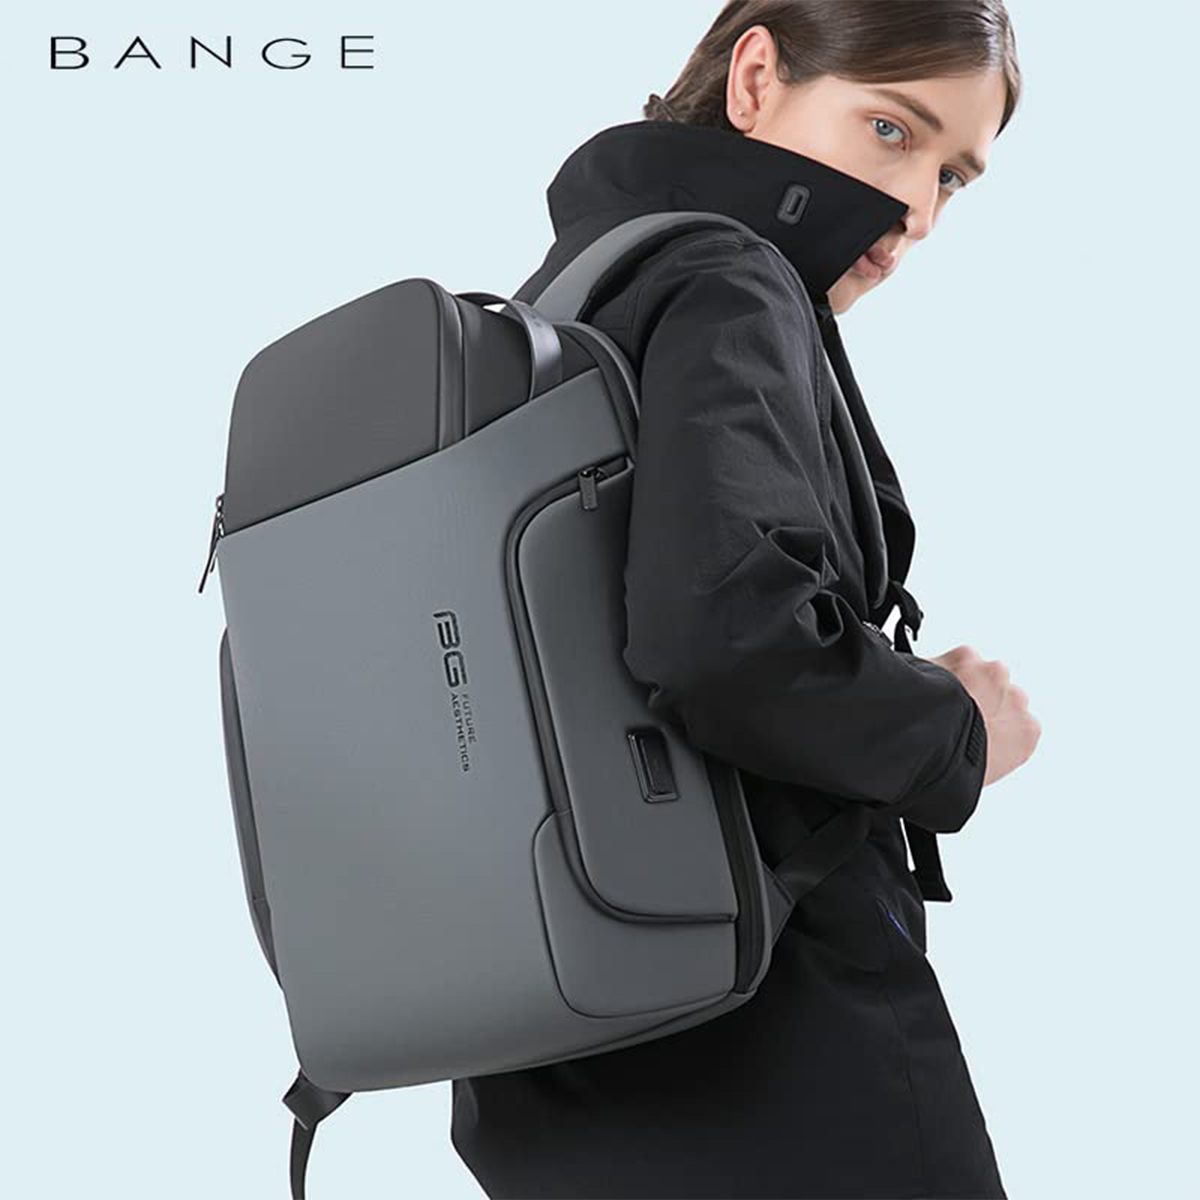 Red Lemon BANGE Nightmask Waterproof Polyester Unisex 15.6 inch Travel Laptop Backpack for Men and Women with USB Port